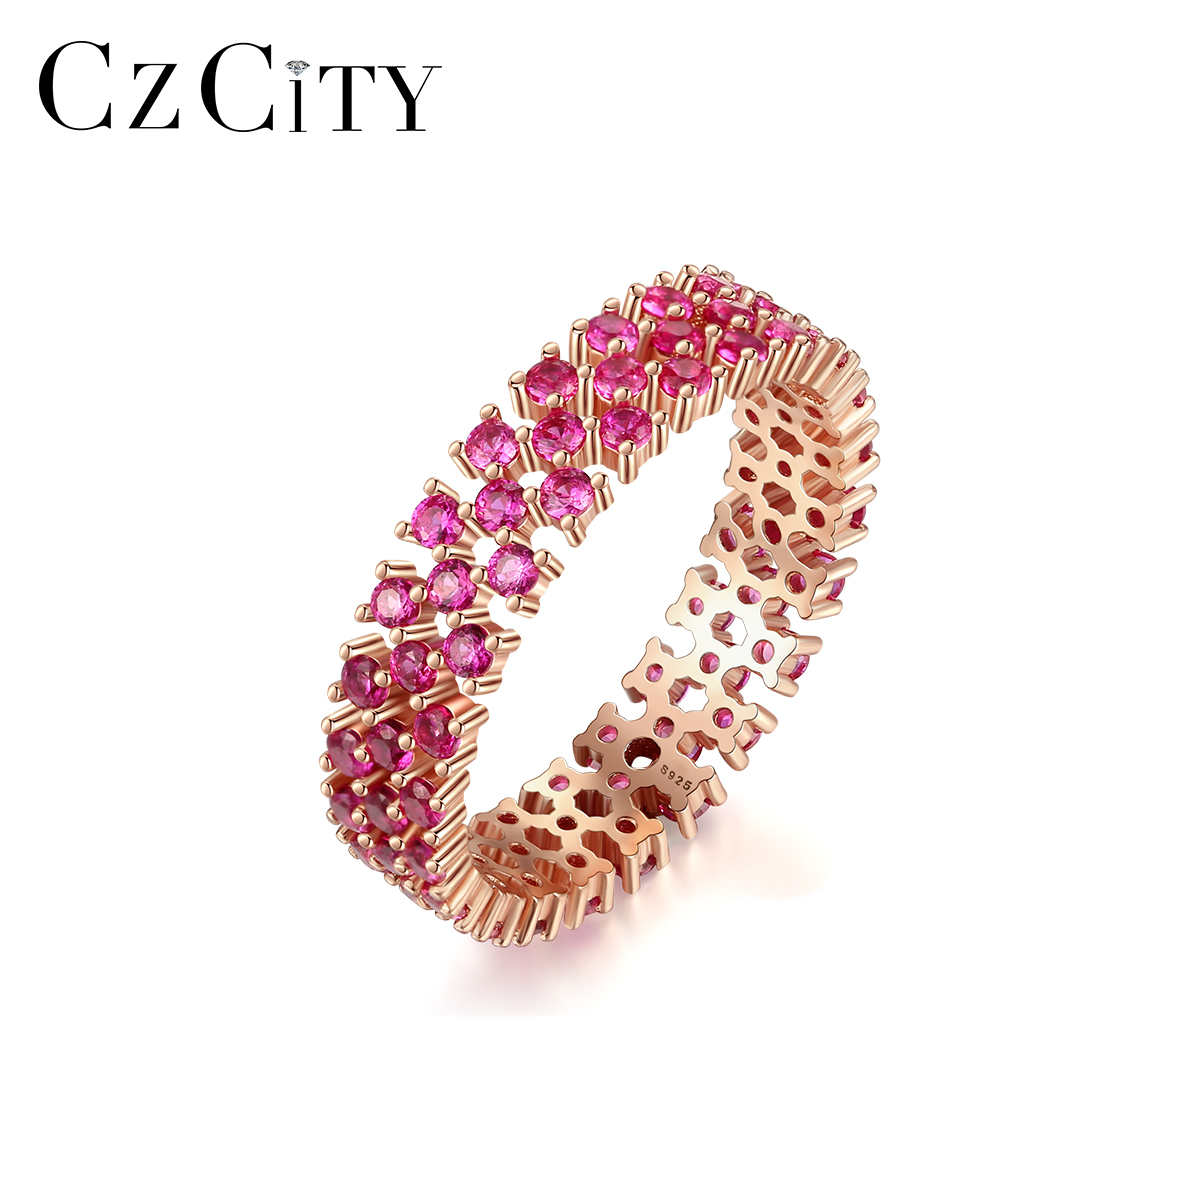 

CZCITY Genuine 925 Sterling Silver Rings for Women Engagement Wedding Fine Jewelry Round Topaz Gemstone Anillos SR0299 V191220